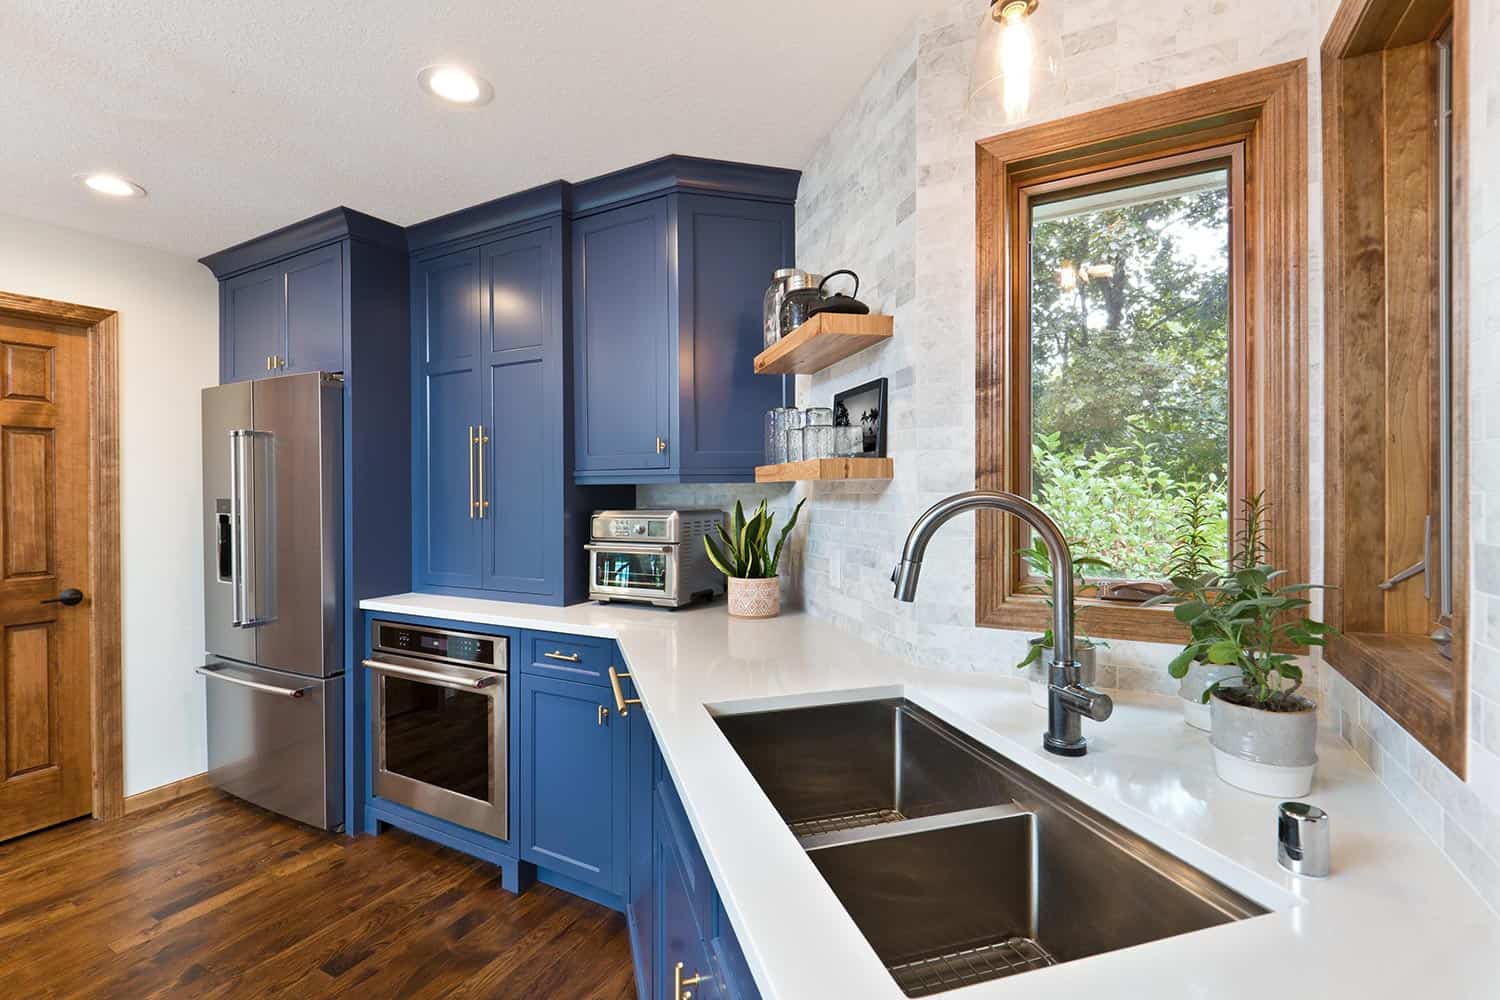 A contemporary kitchen renovation remodeling featuring a hardwood floor kitchen sink